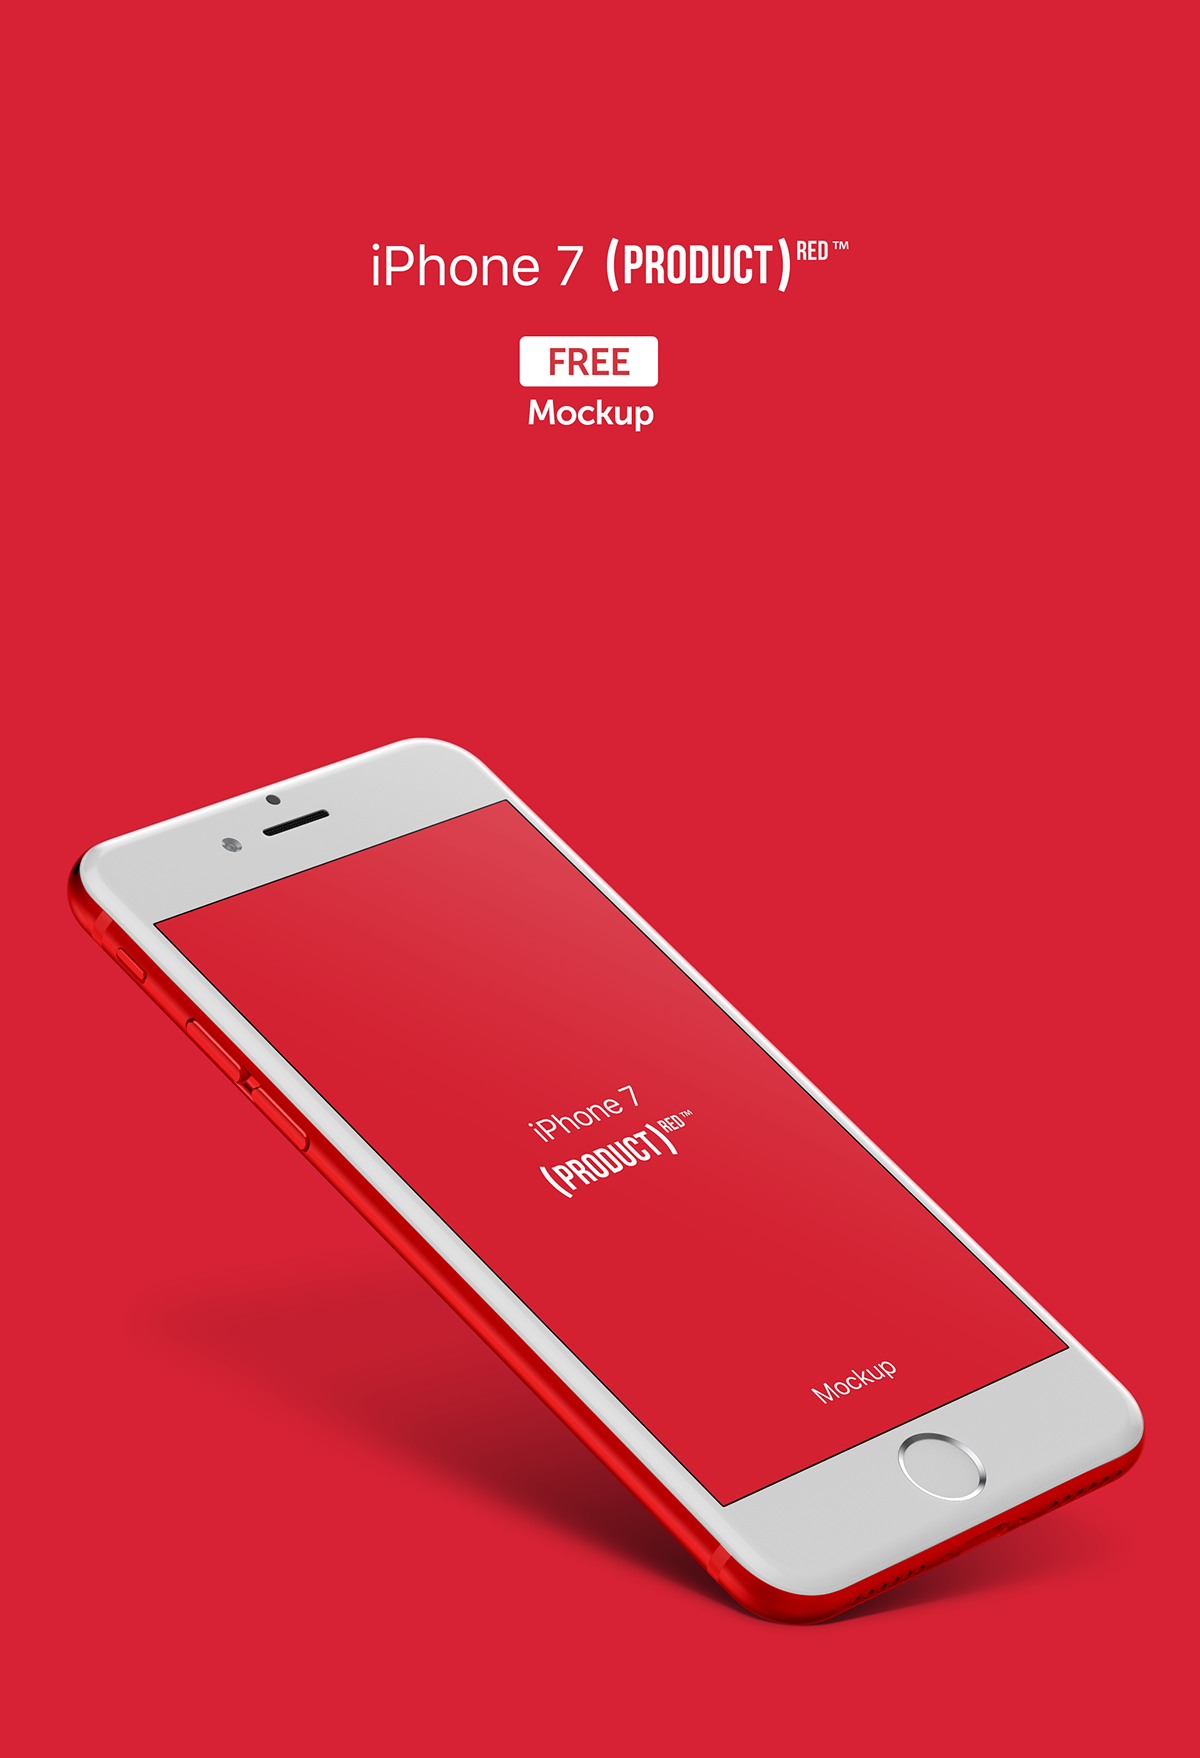 iPhone7 Product Red Mockup Free on Behance